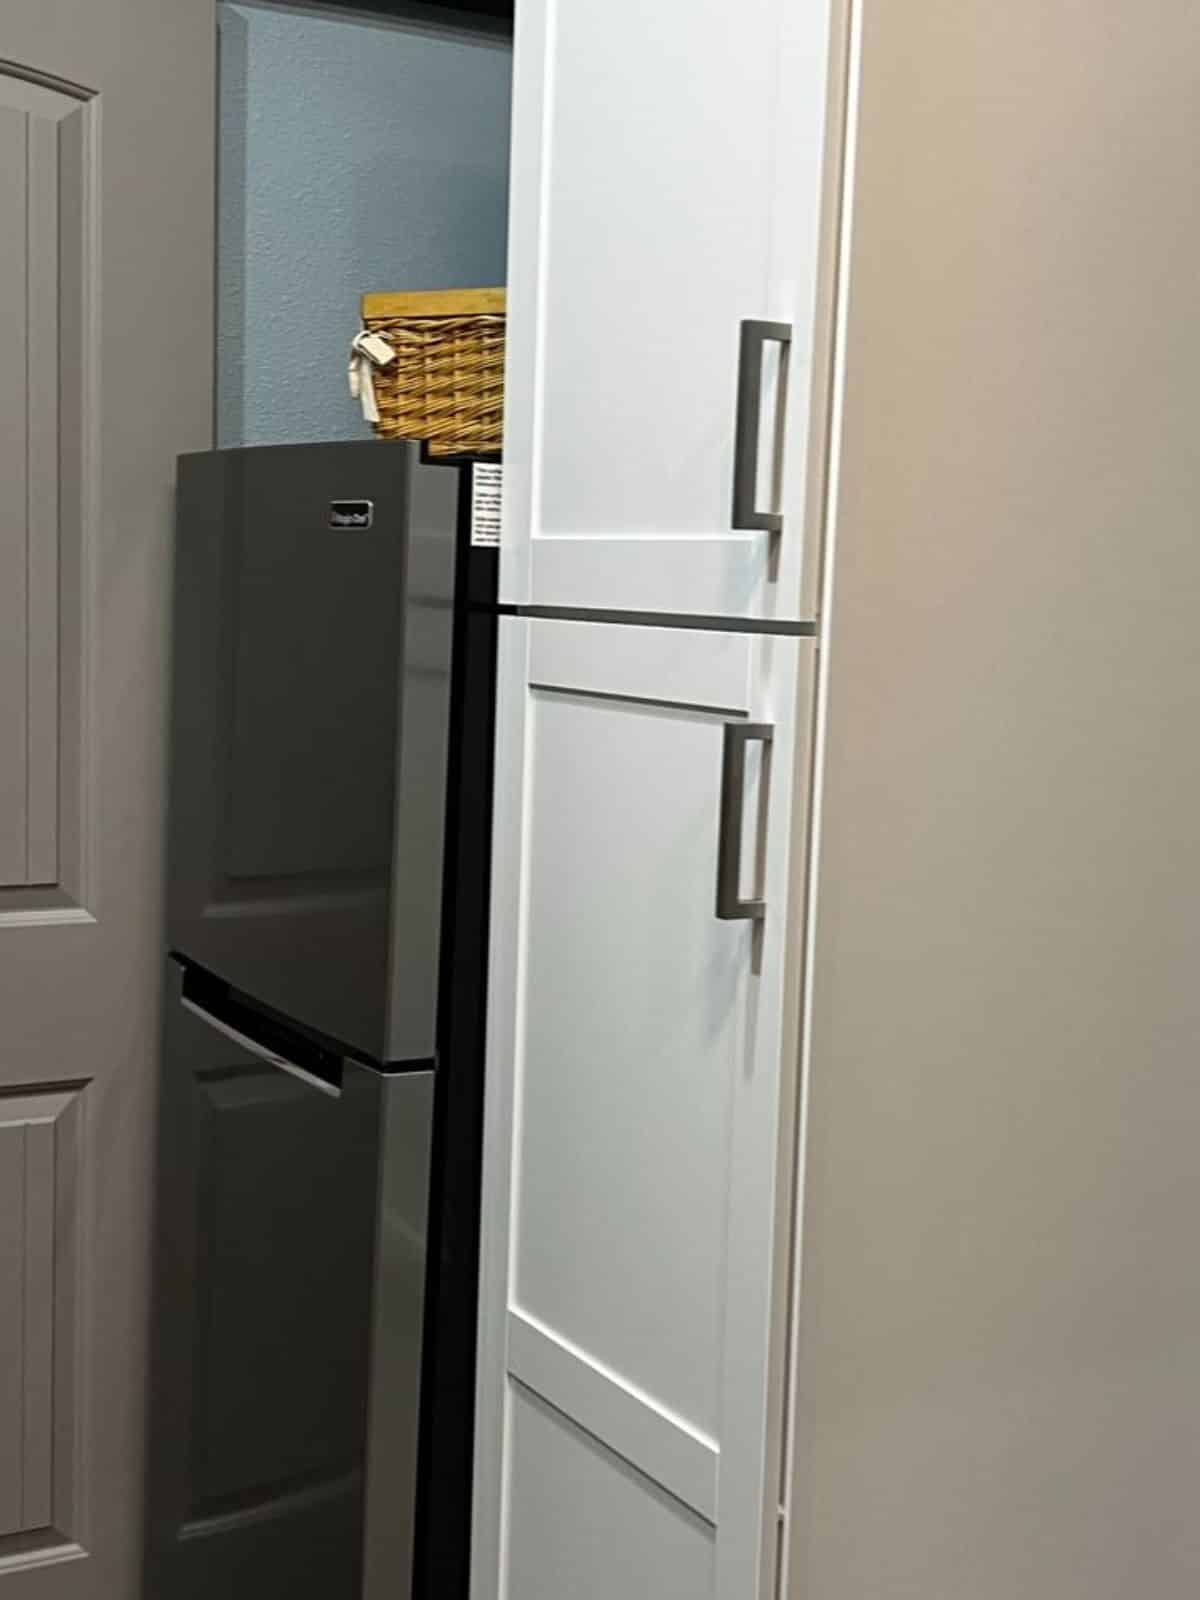 double door refrigerator with storage cabinets for pantry items